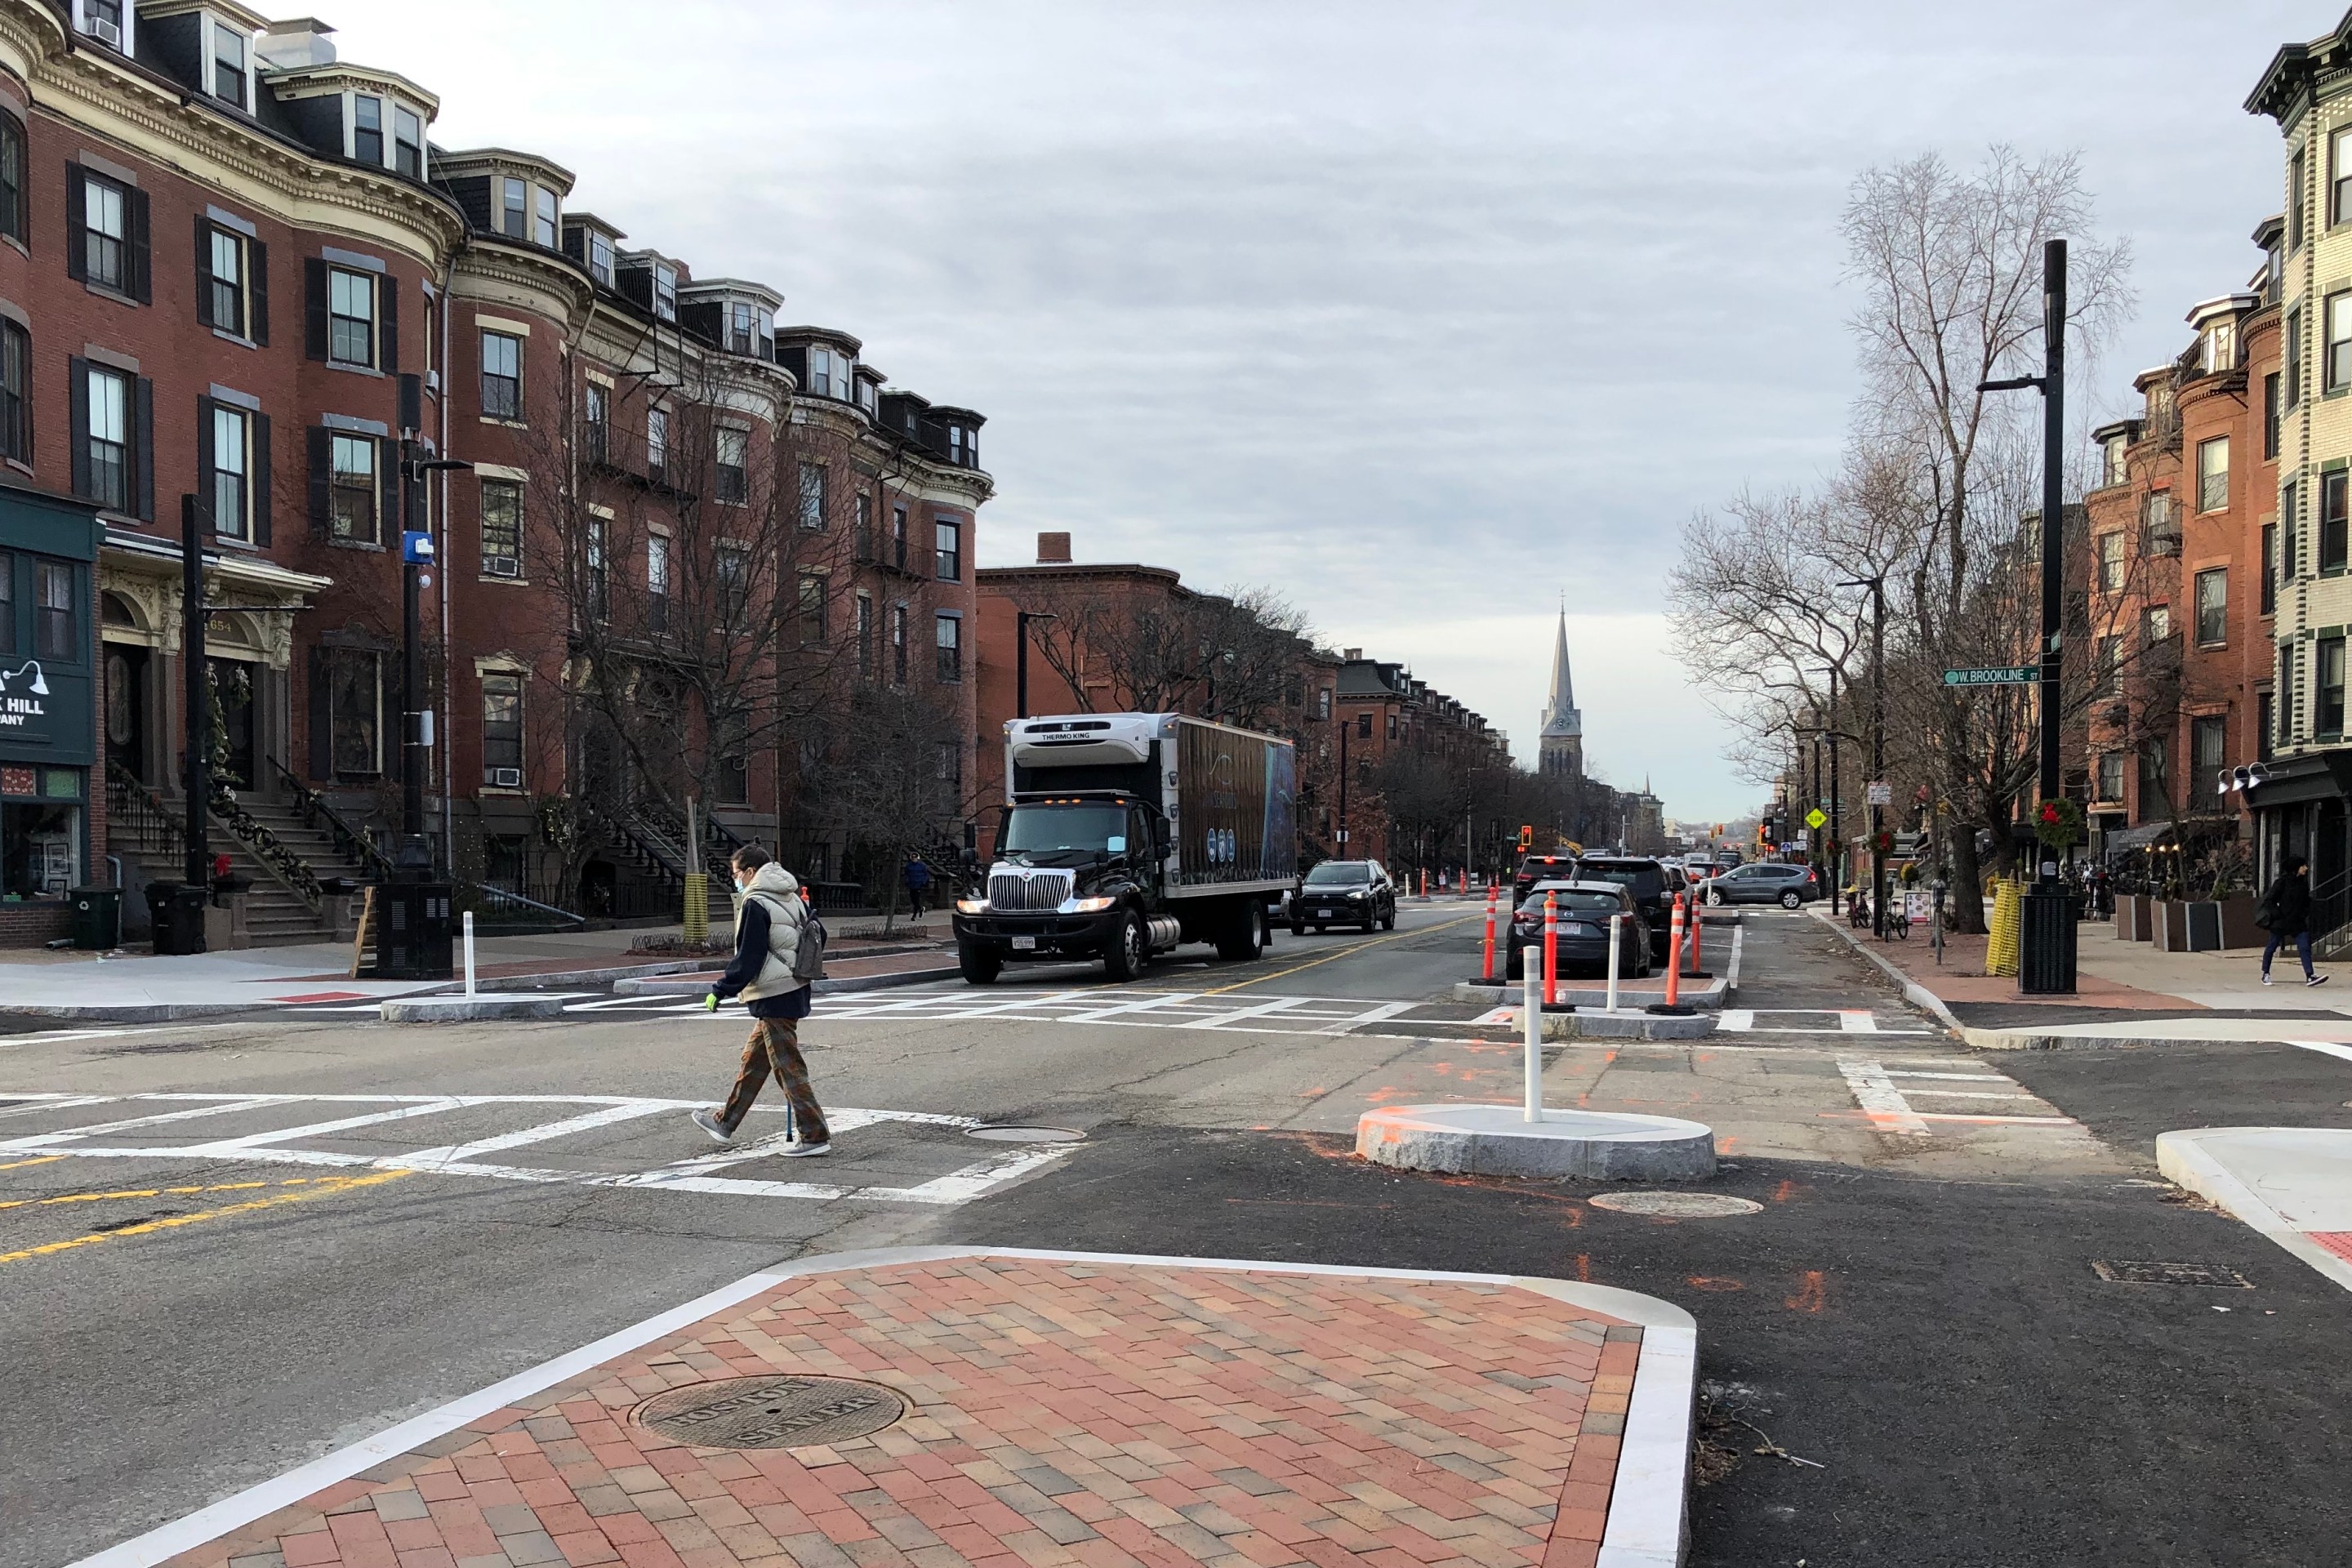 A pedestrian crosses Tremont Street in a new crosswalk. In the foreground is a newly-installed median island, about the size of a parked car, that is paved in bricks and ringed by a granite curb. To its left are two lanes for two-way car traffic; to its right is an asphalt-paved bike lane, and a second curb at the right edge of the photo delineates the street's sidewalk. A smaller granite curb island is located at the far side of the crosswalk, and two other pairs of islands in a similar configuration protect the crosswalk on the opposite side of the intersection. Historic brick rowhomes line both sides of the street. In the distance is a church steeple.